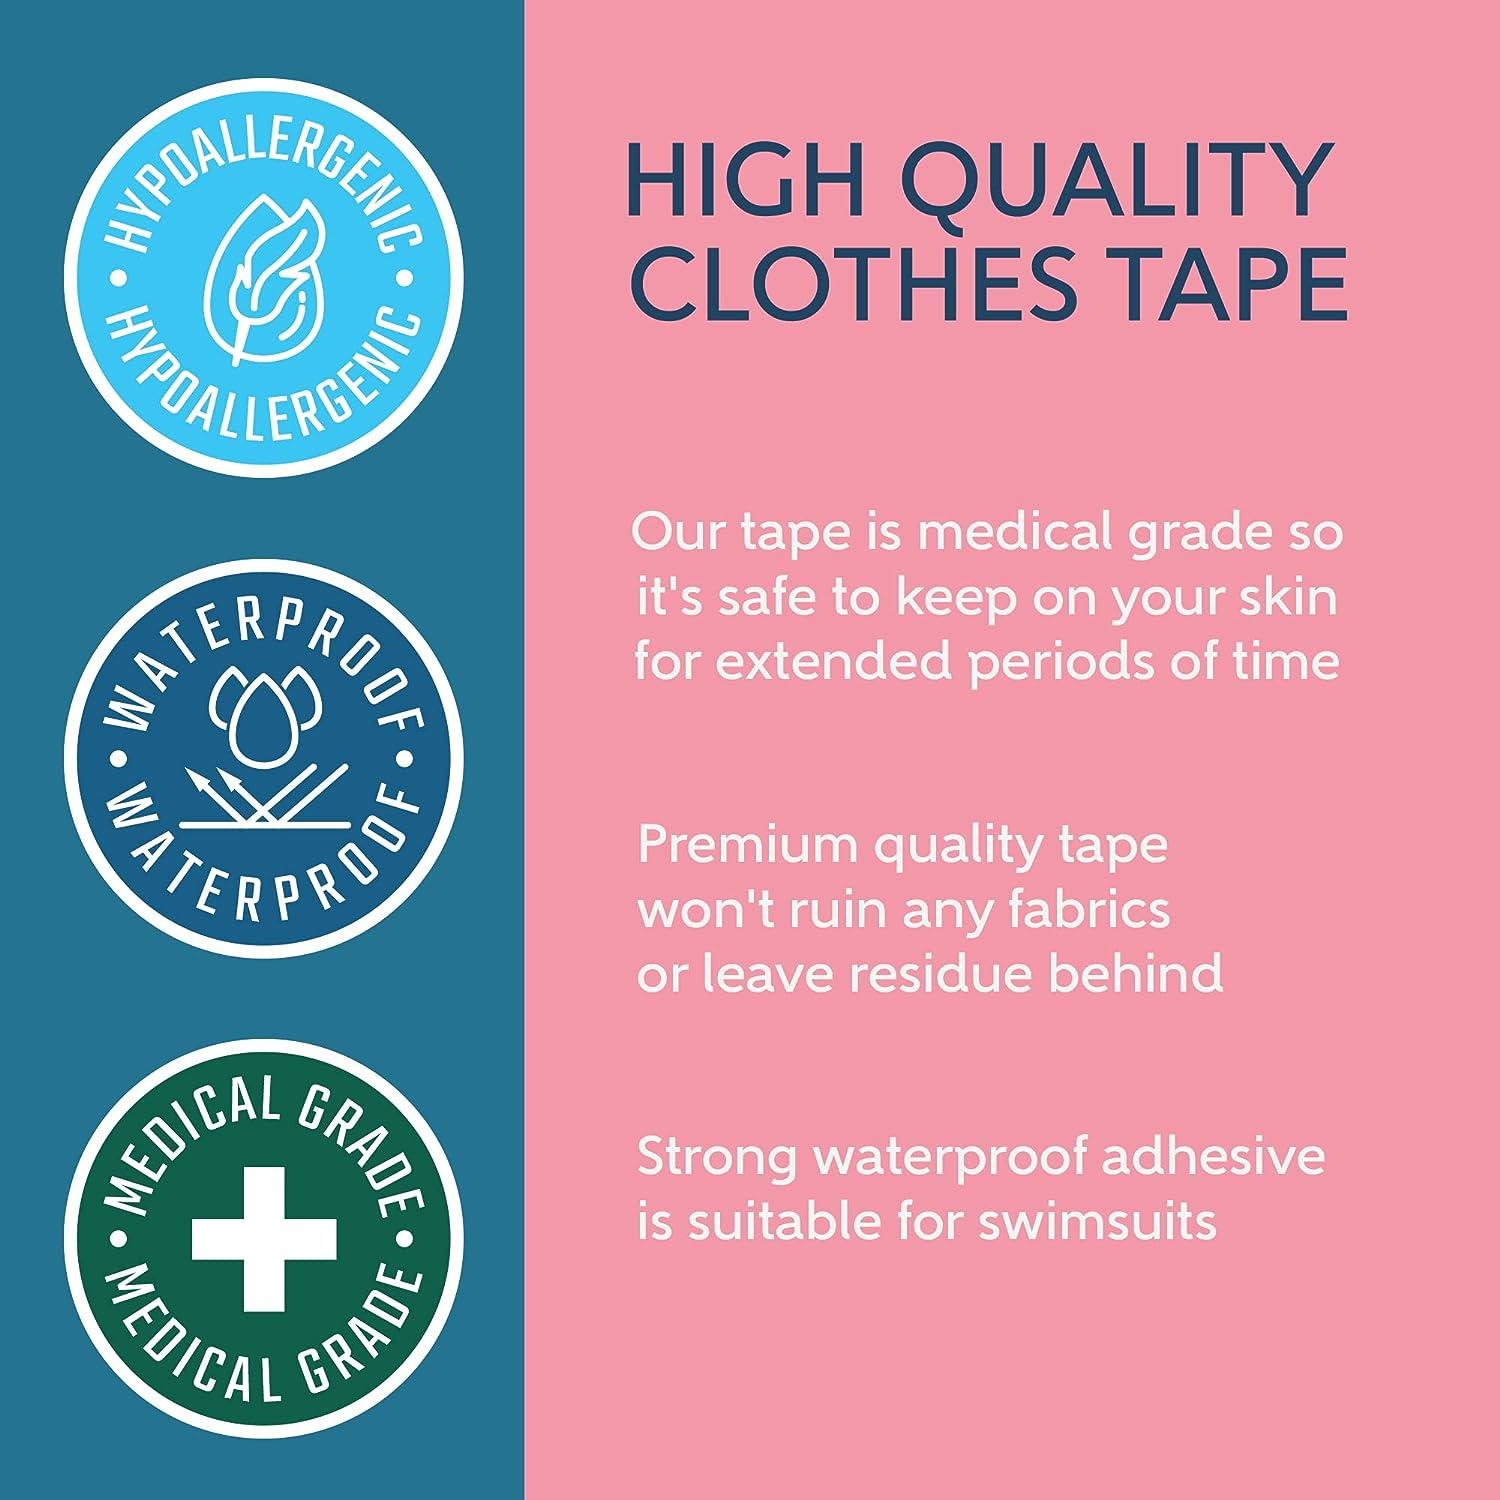 CLING IT2 Double Sided Tape for Clothes and Fashion 100 Strips